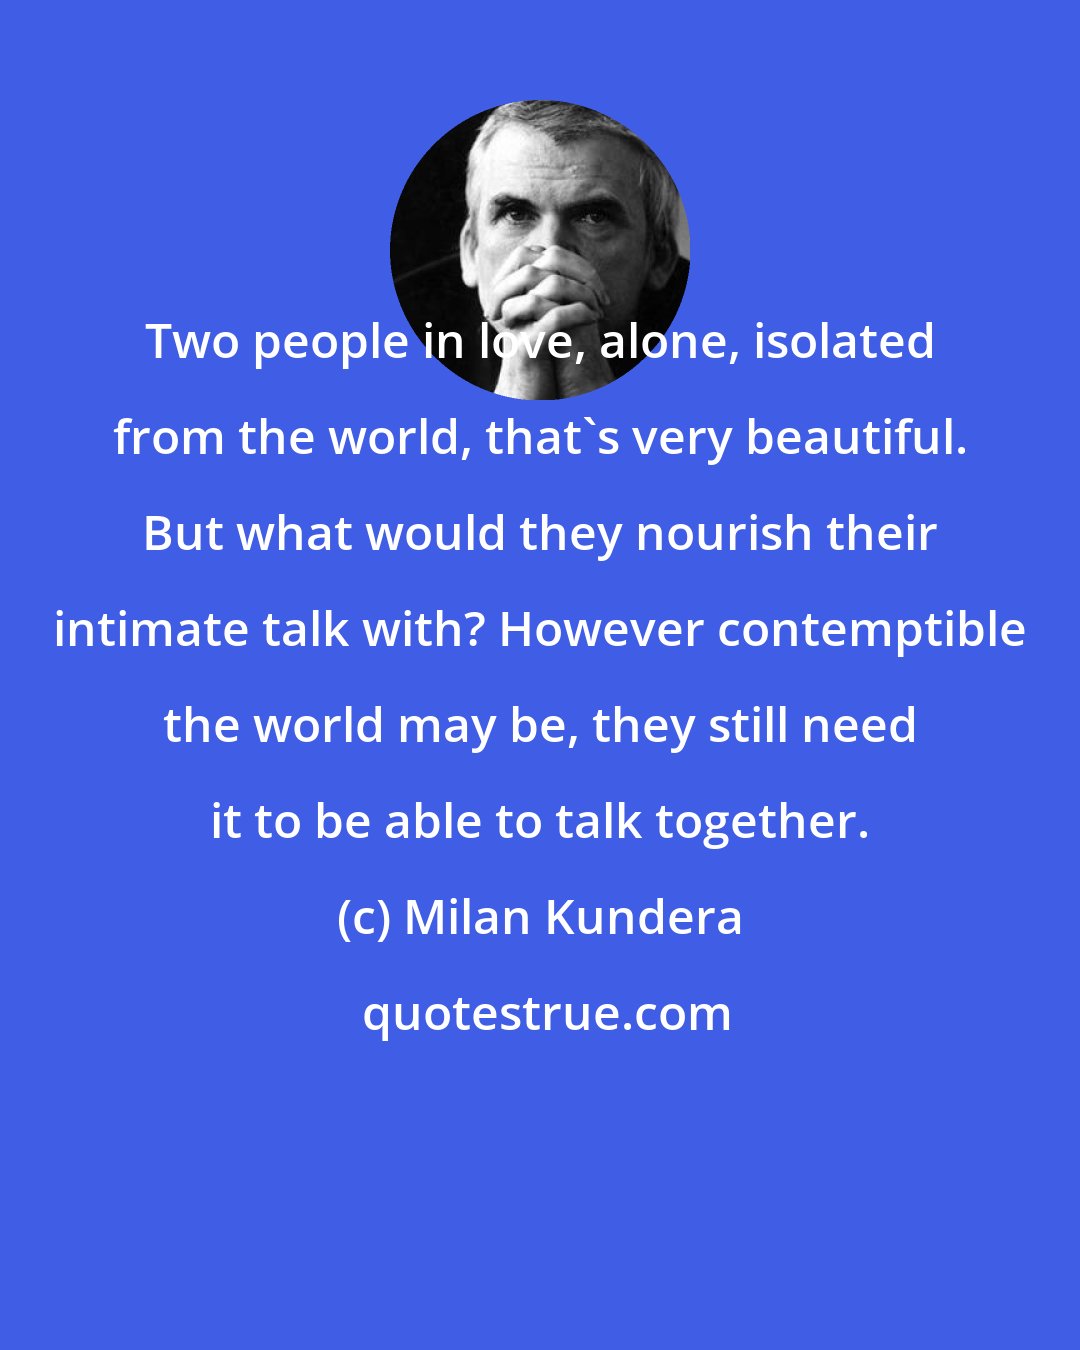 Milan Kundera: Two people in love, alone, isolated from the world, that's very beautiful. But what would they nourish their intimate talk with? However contemptible the world may be, they still need it to be able to talk together.